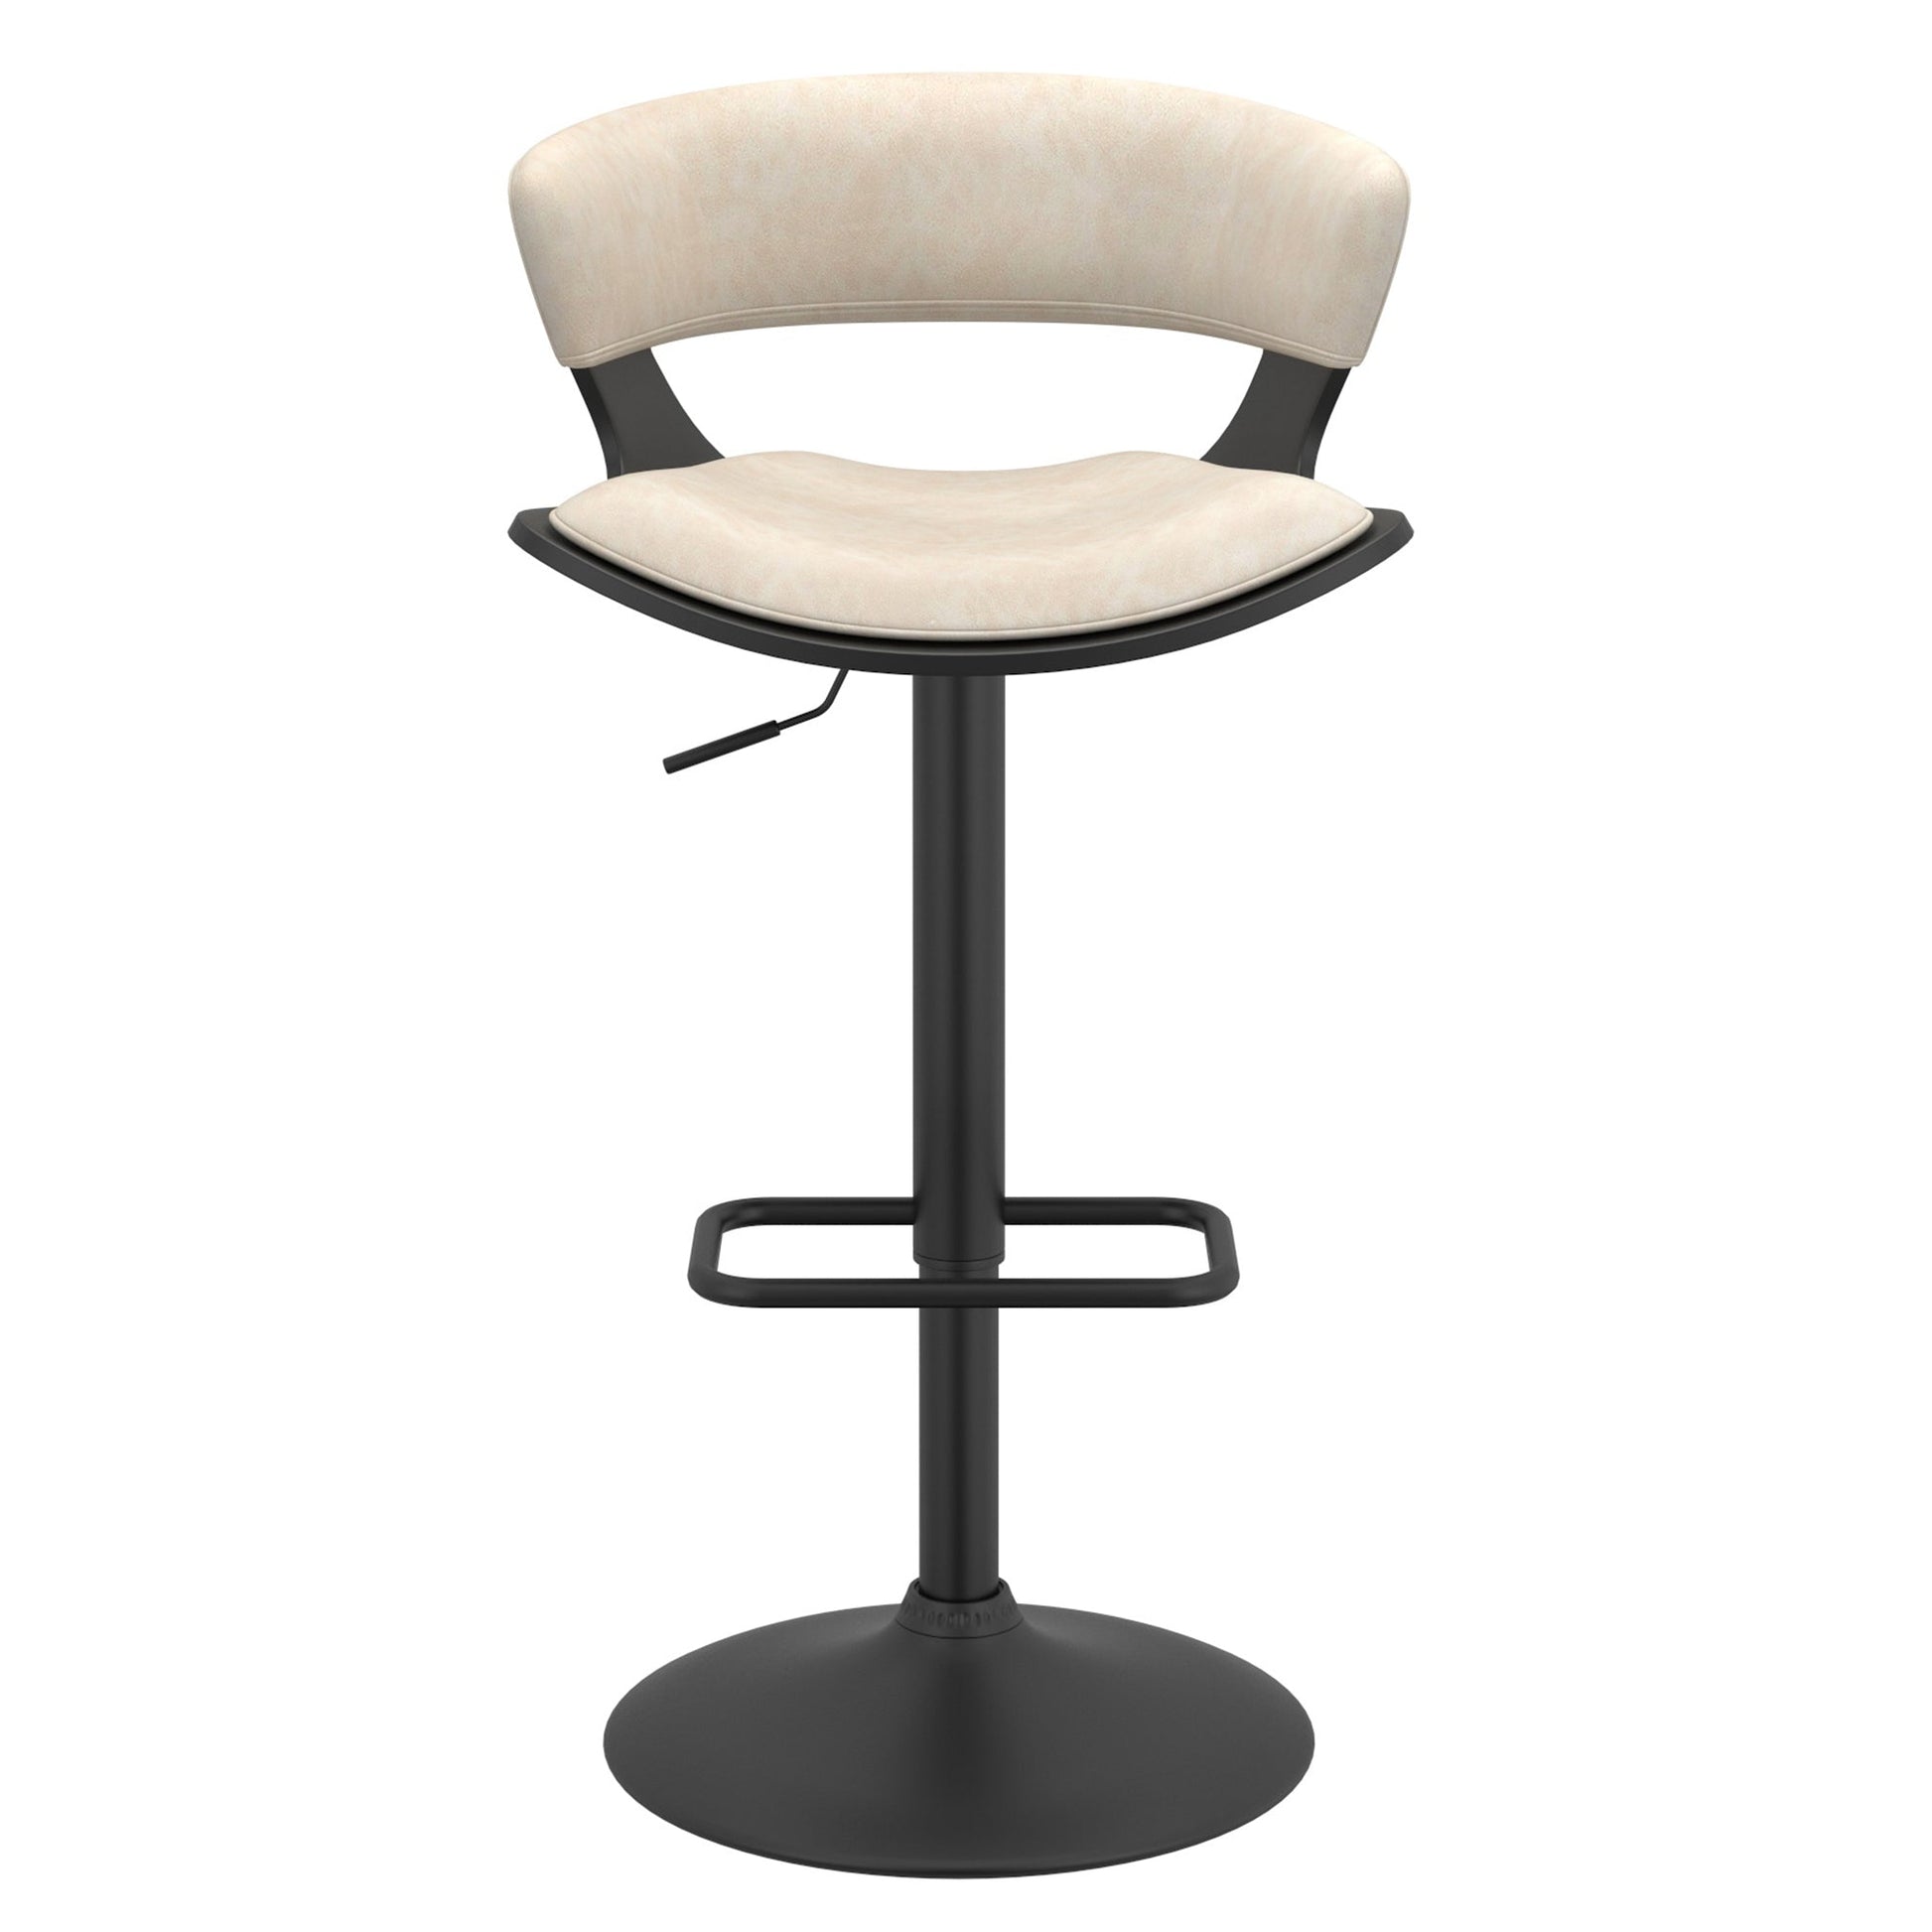 Height Adjustable Bar Stools | Set of 2 | Rover Cream - Your Bar Stools Canada